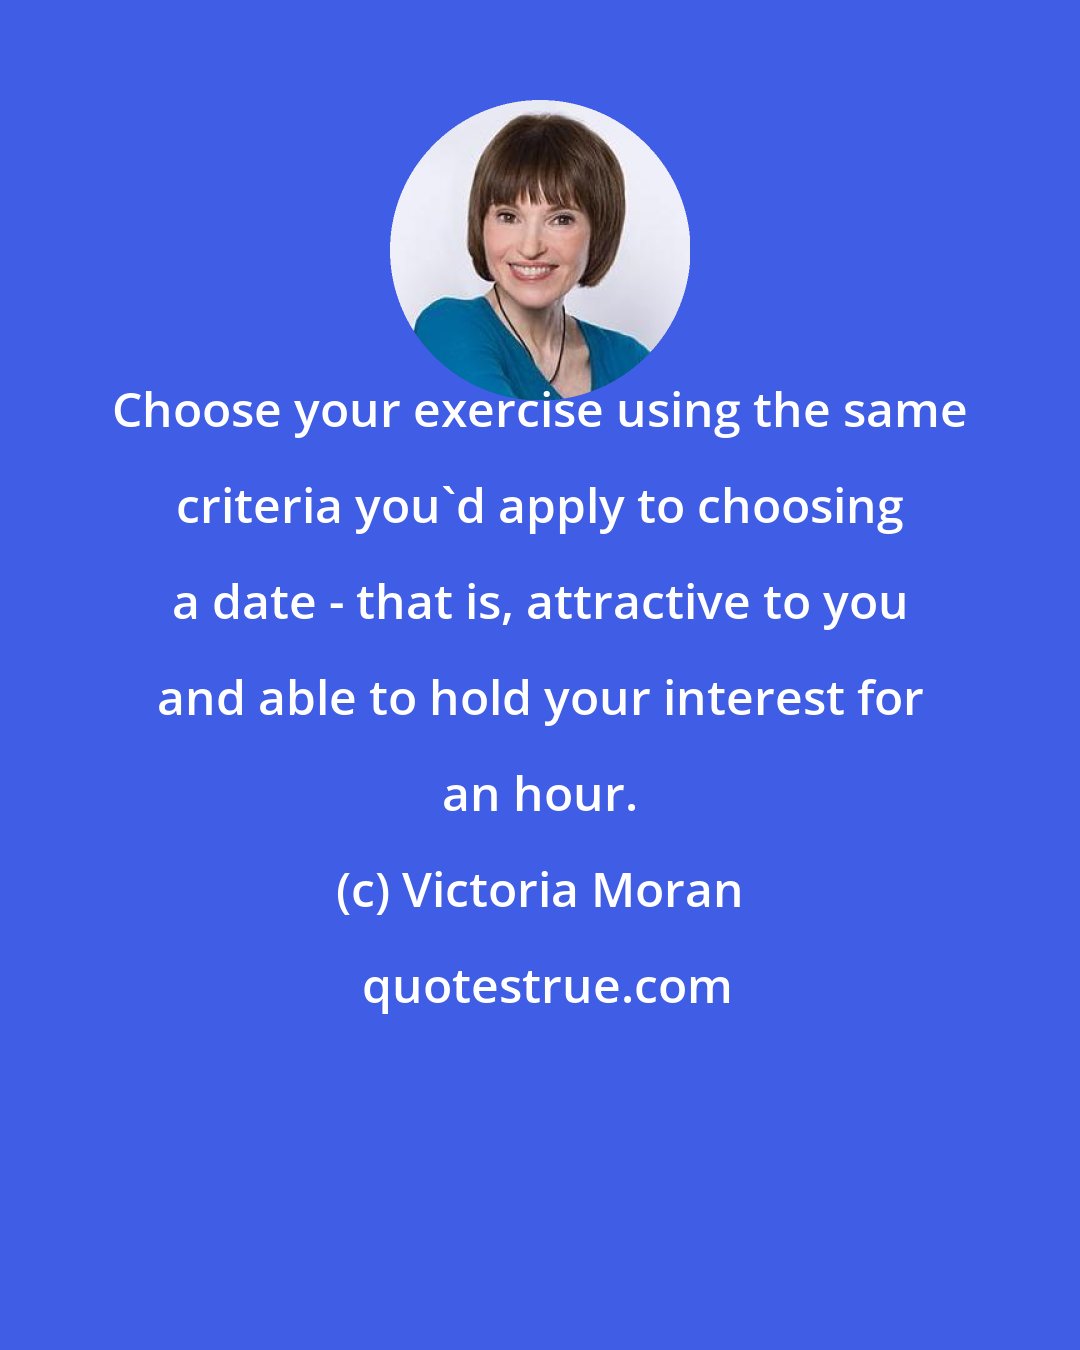 Victoria Moran: Choose your exercise using the same criteria you'd apply to choosing a date - that is, attractive to you and able to hold your interest for an hour.